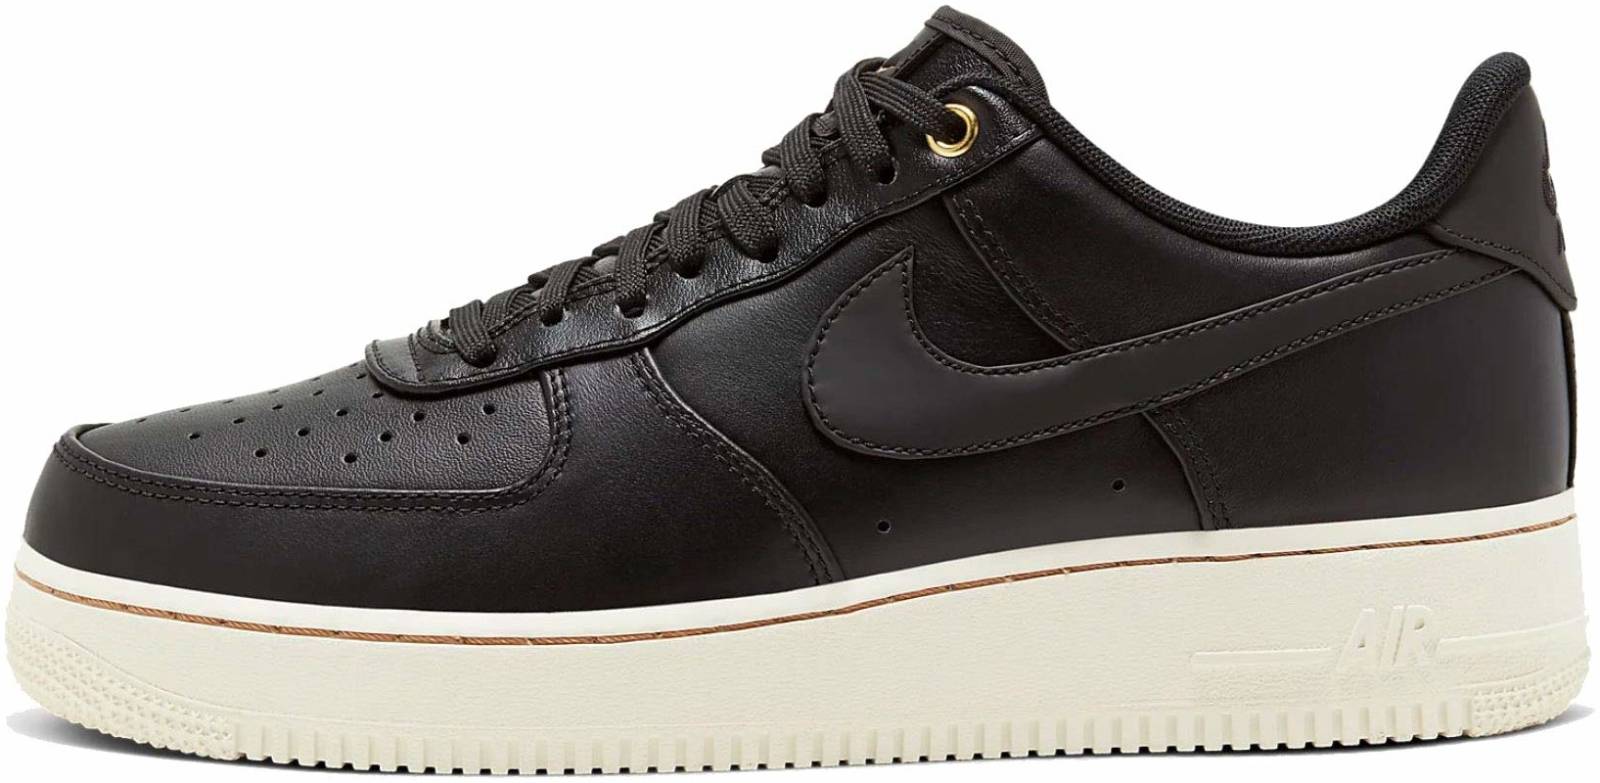 8 Reasons to/NOT to Buy Nike Air Force 1 Premium (Oct 2021 ...